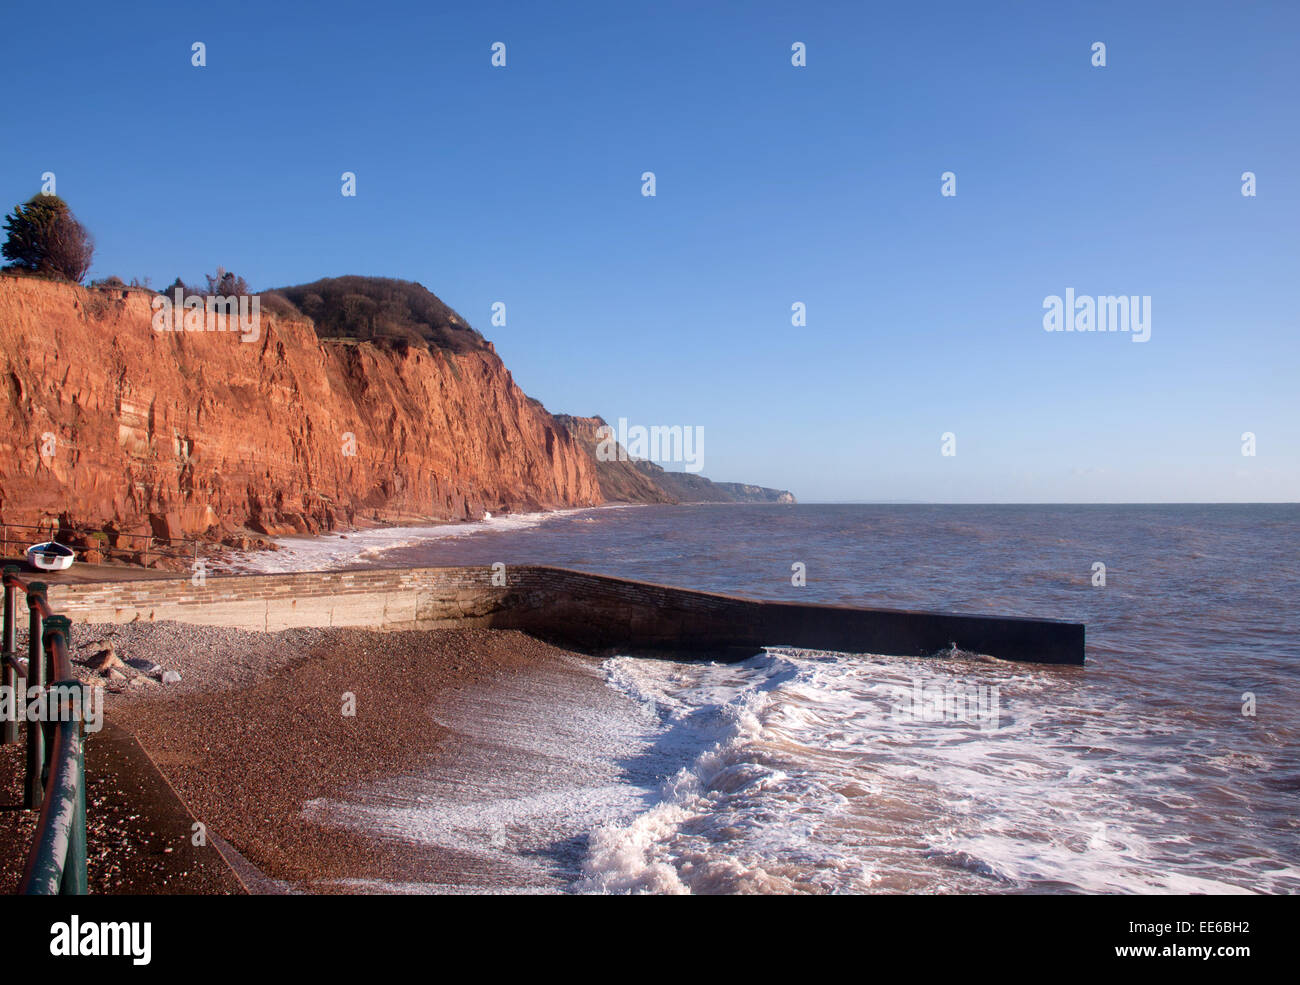 Cliff erosion at Sidmouth, Devon, the sea is endangering property on top of East cliff as it cuts into the cliff face 1 mtre p/a Stock Photo